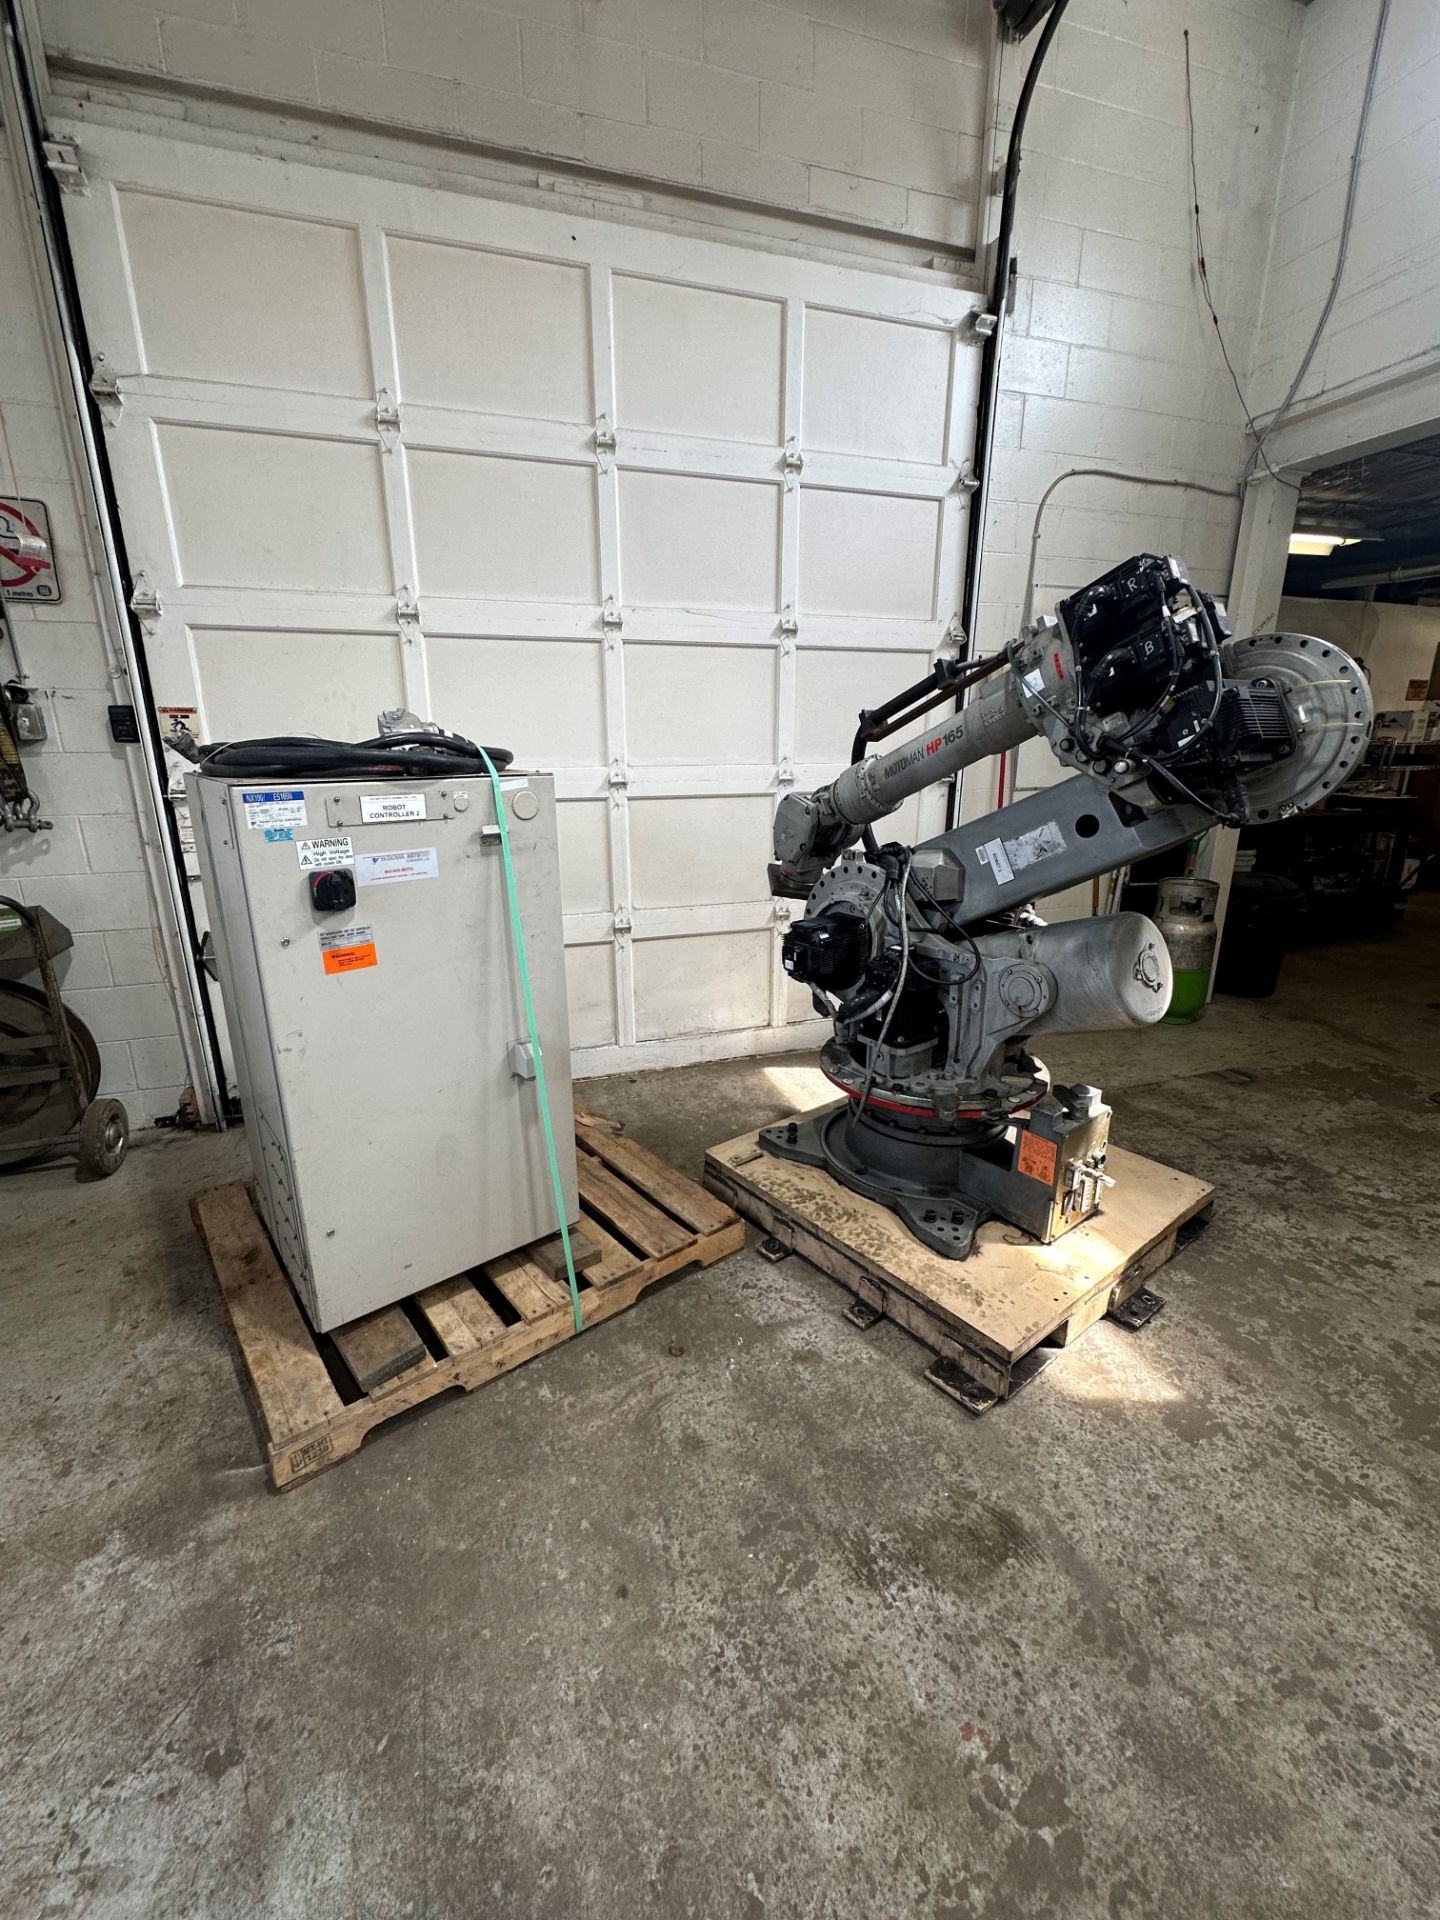 2004 MOTOMAN HP165 ROBOT, TYPE YR-ES165N-A00, 165KG PAYLOAD W/ PANEL AND CABLES (NO TEACH